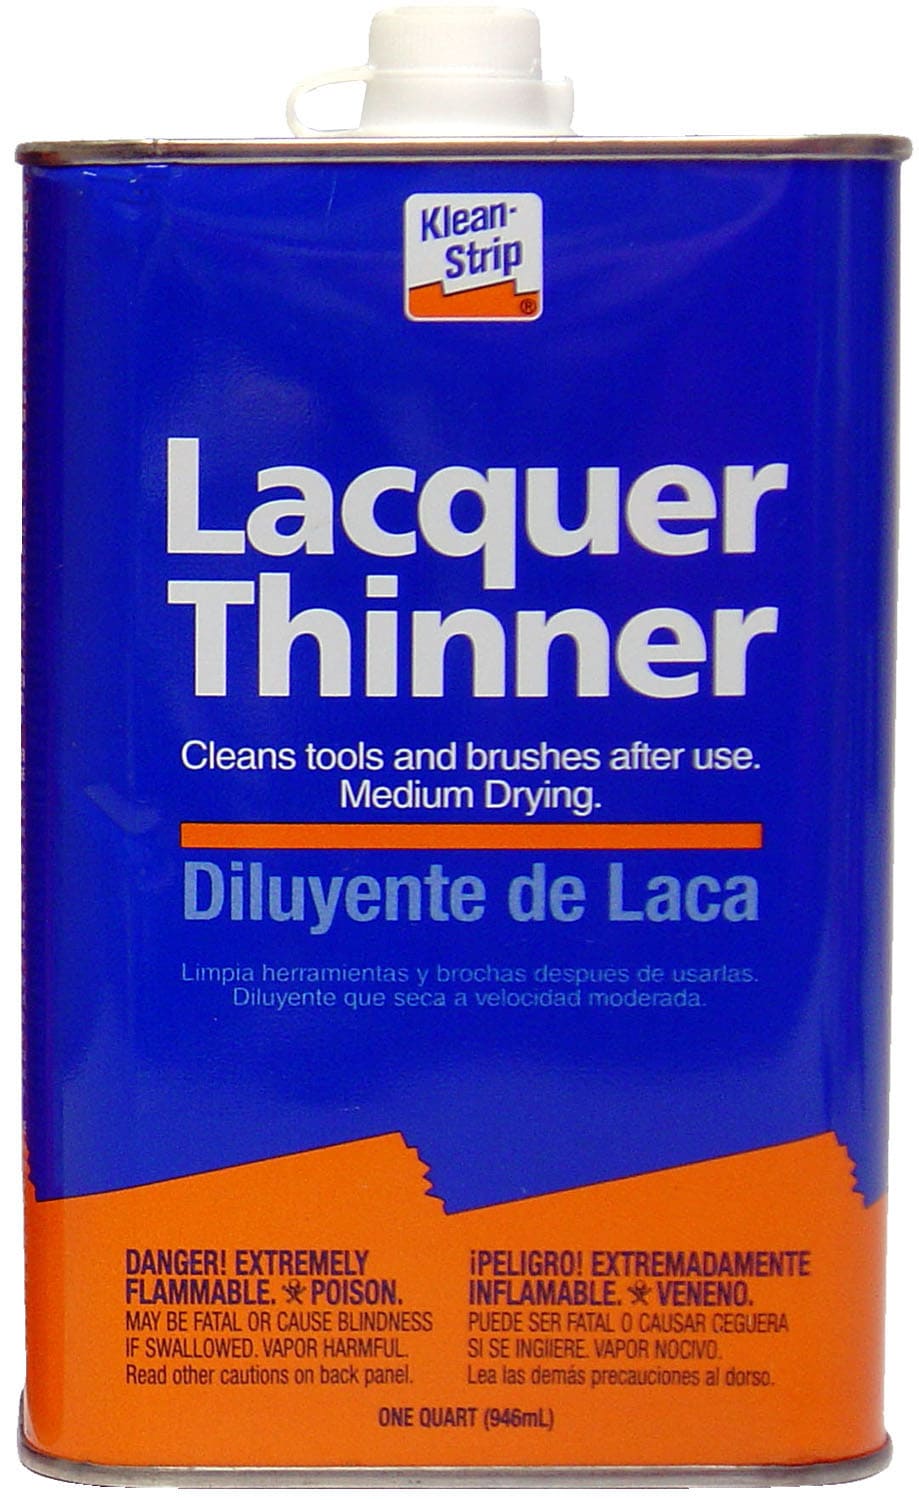 Klean-Strip 1 qt. Lacquer Thinner at Tractor Supply Co.